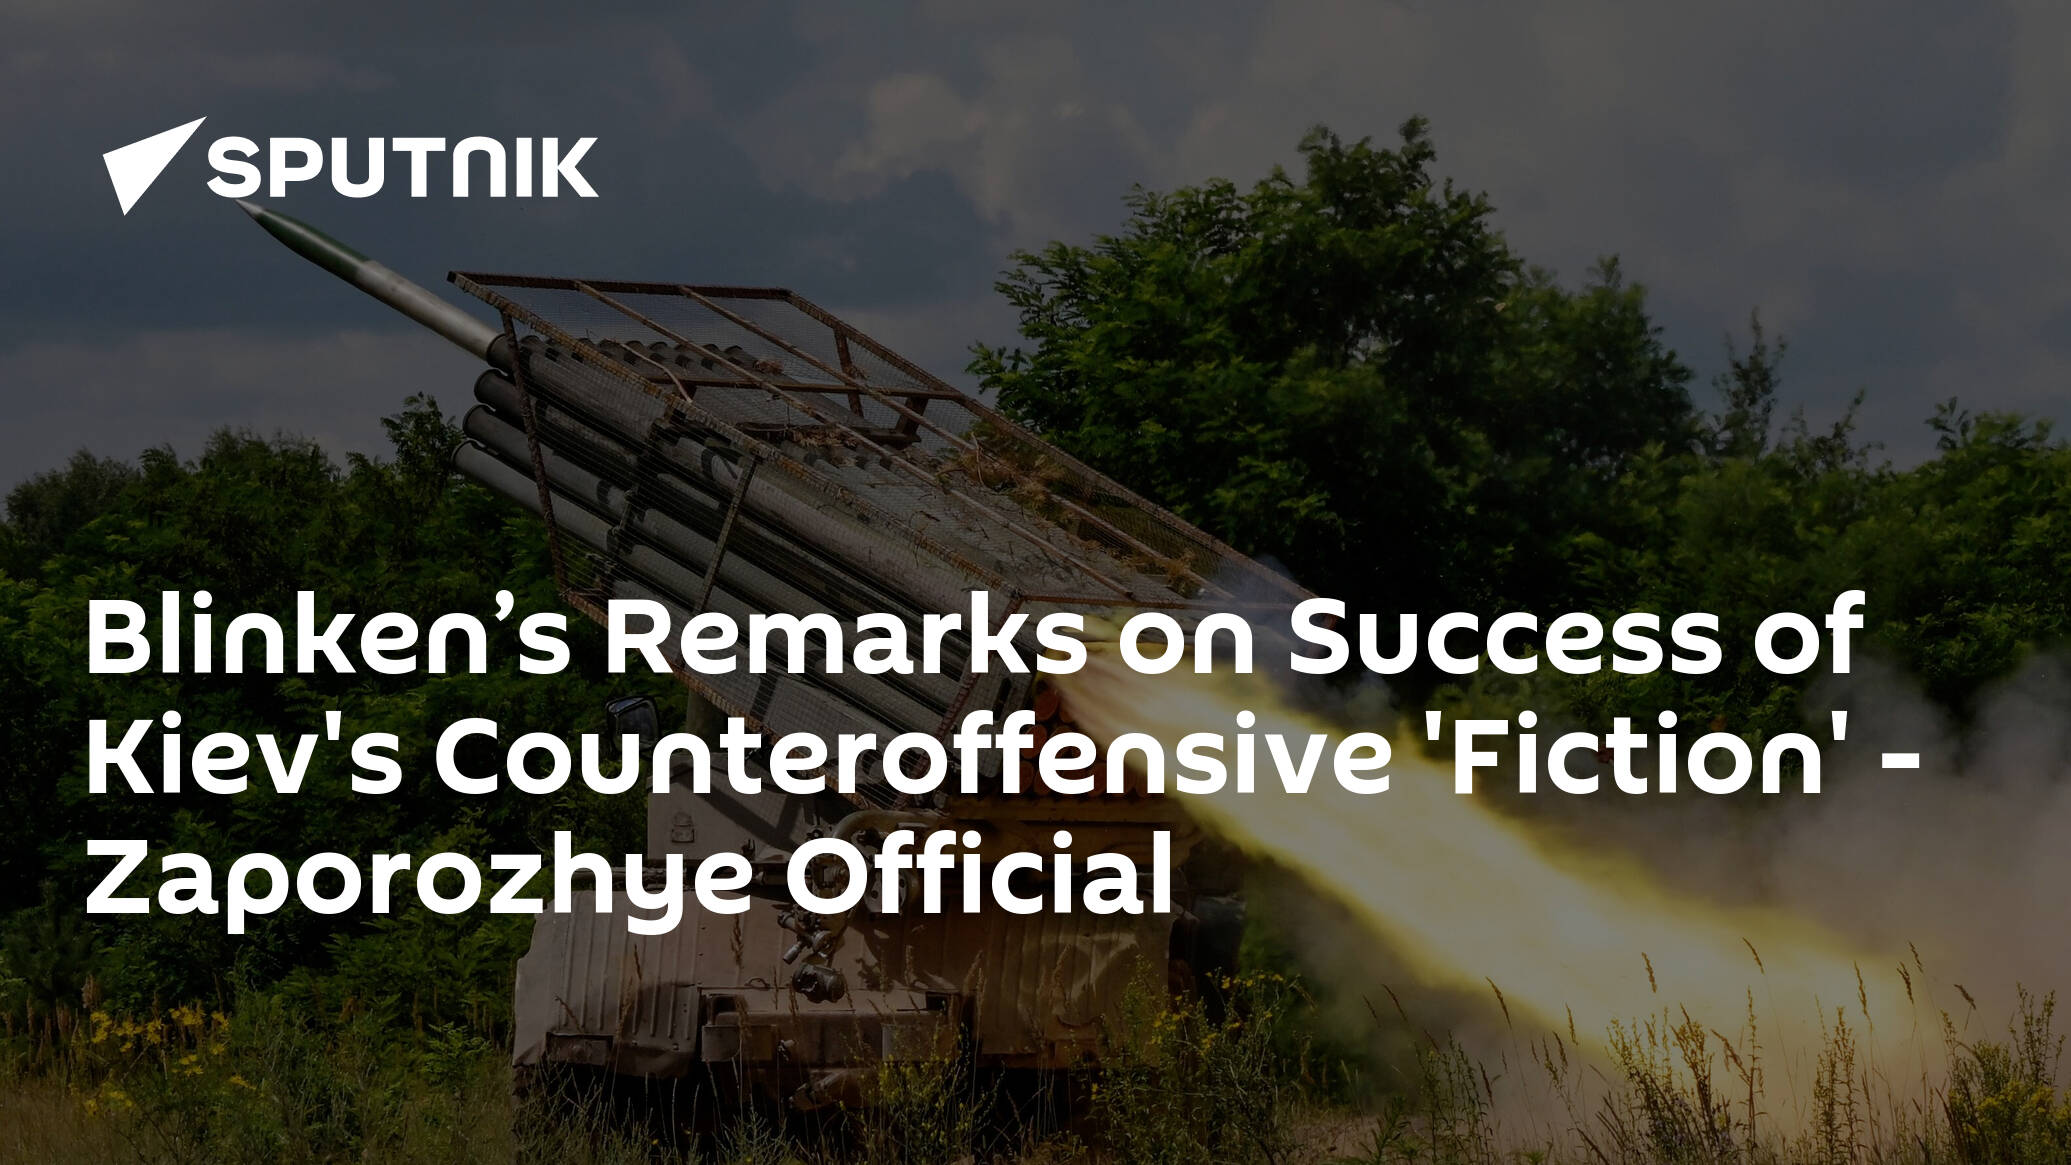 Blinken’s Remarks on Success of Kiev's Counteroffensive 'Fiction' – Zaporozhye Official